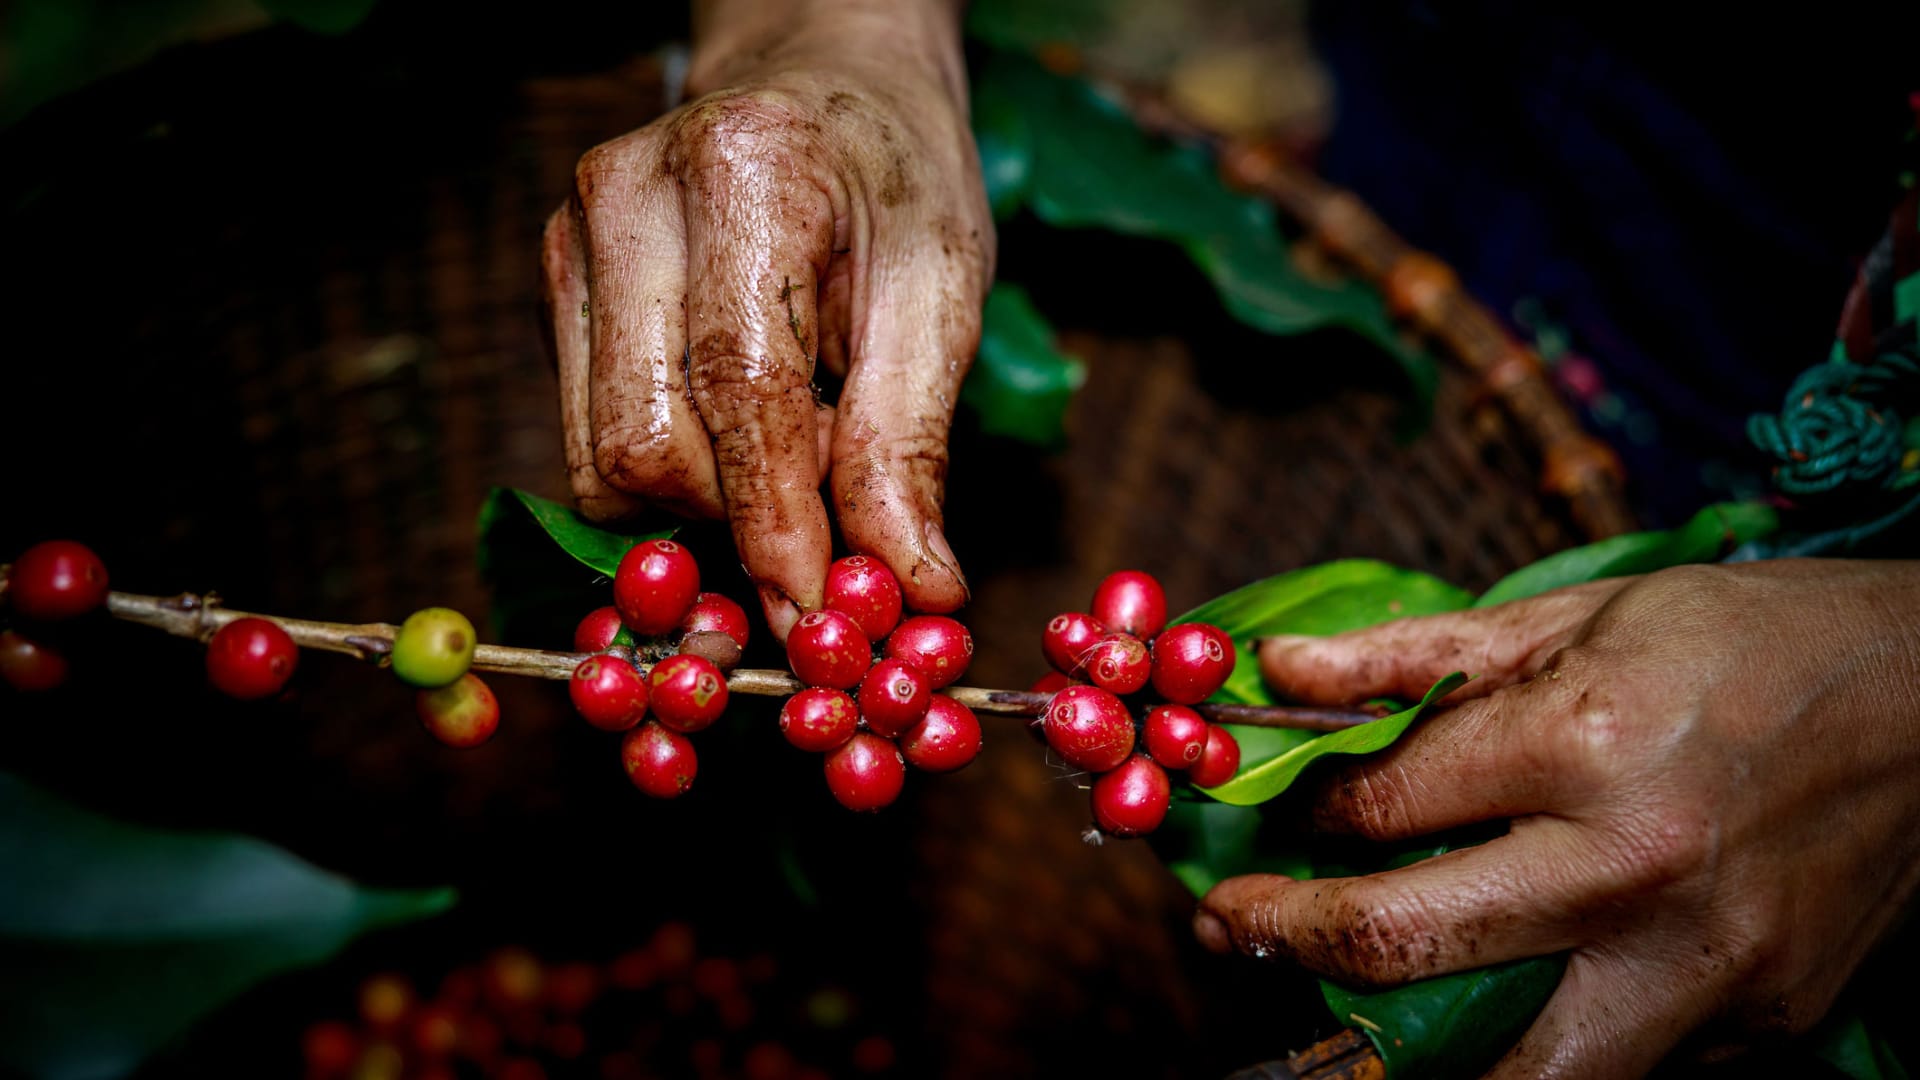 New Science: Drinking Coffee Might Help Save the Planet